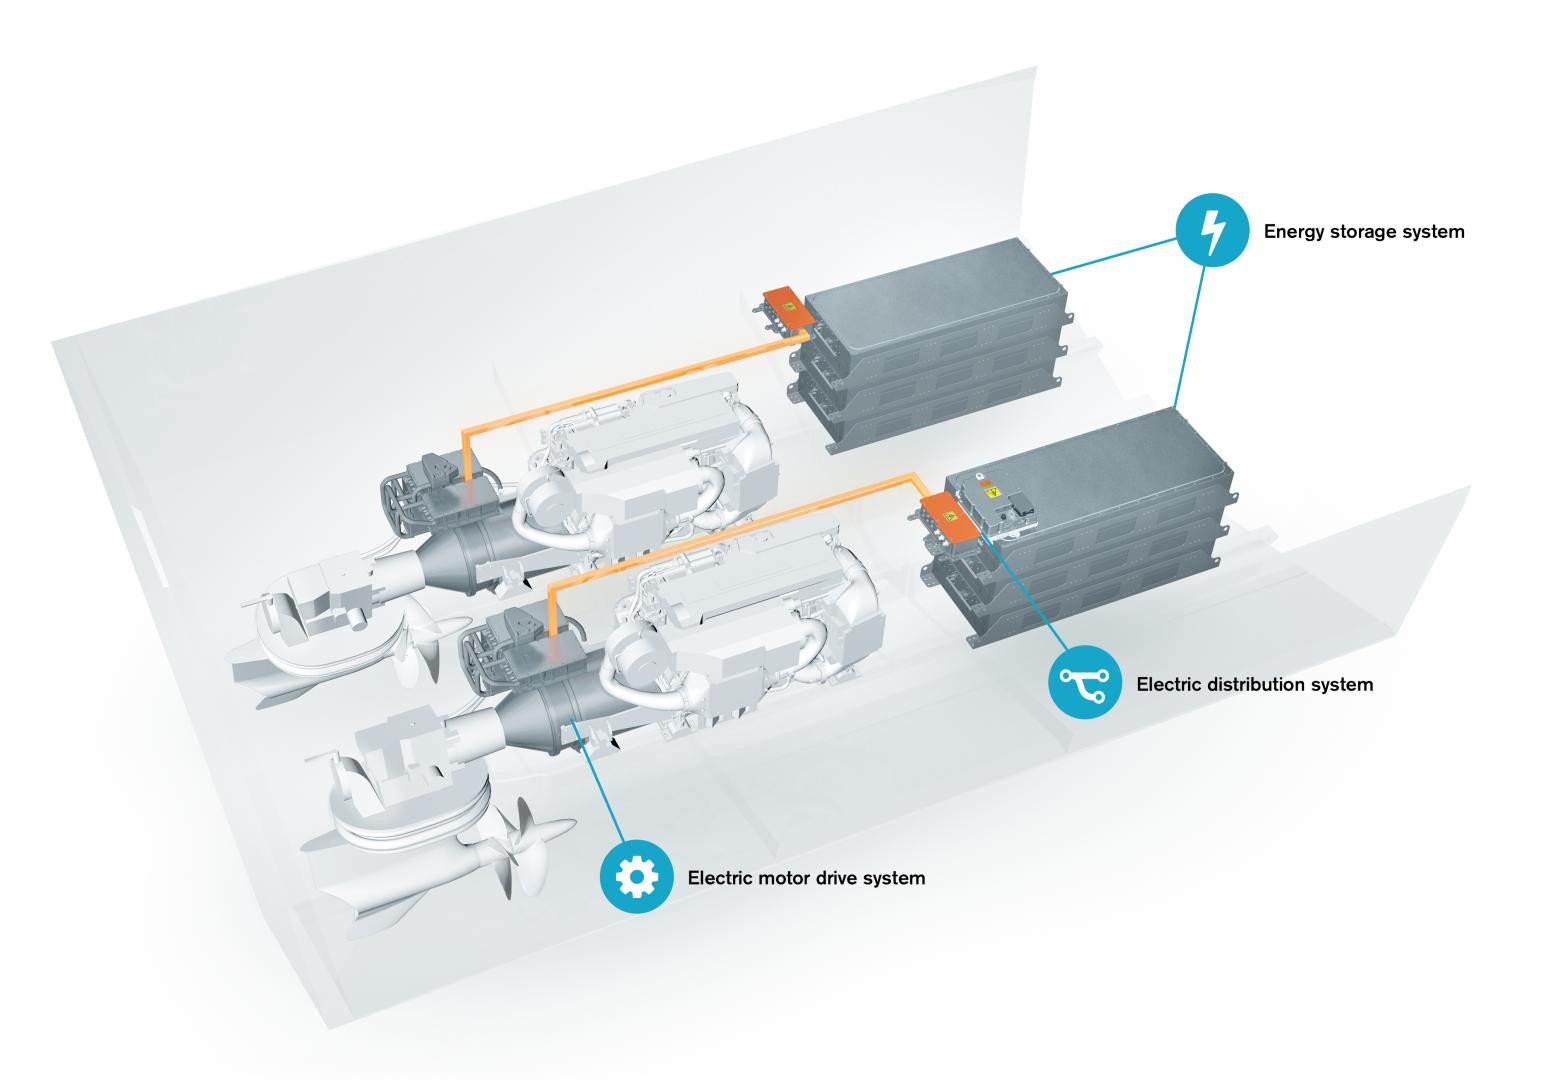 Designed to enable zero emission running for marine vessels, Volvo Penta has unveiled a hybrid concept allows entry into environmentally sensitive zones